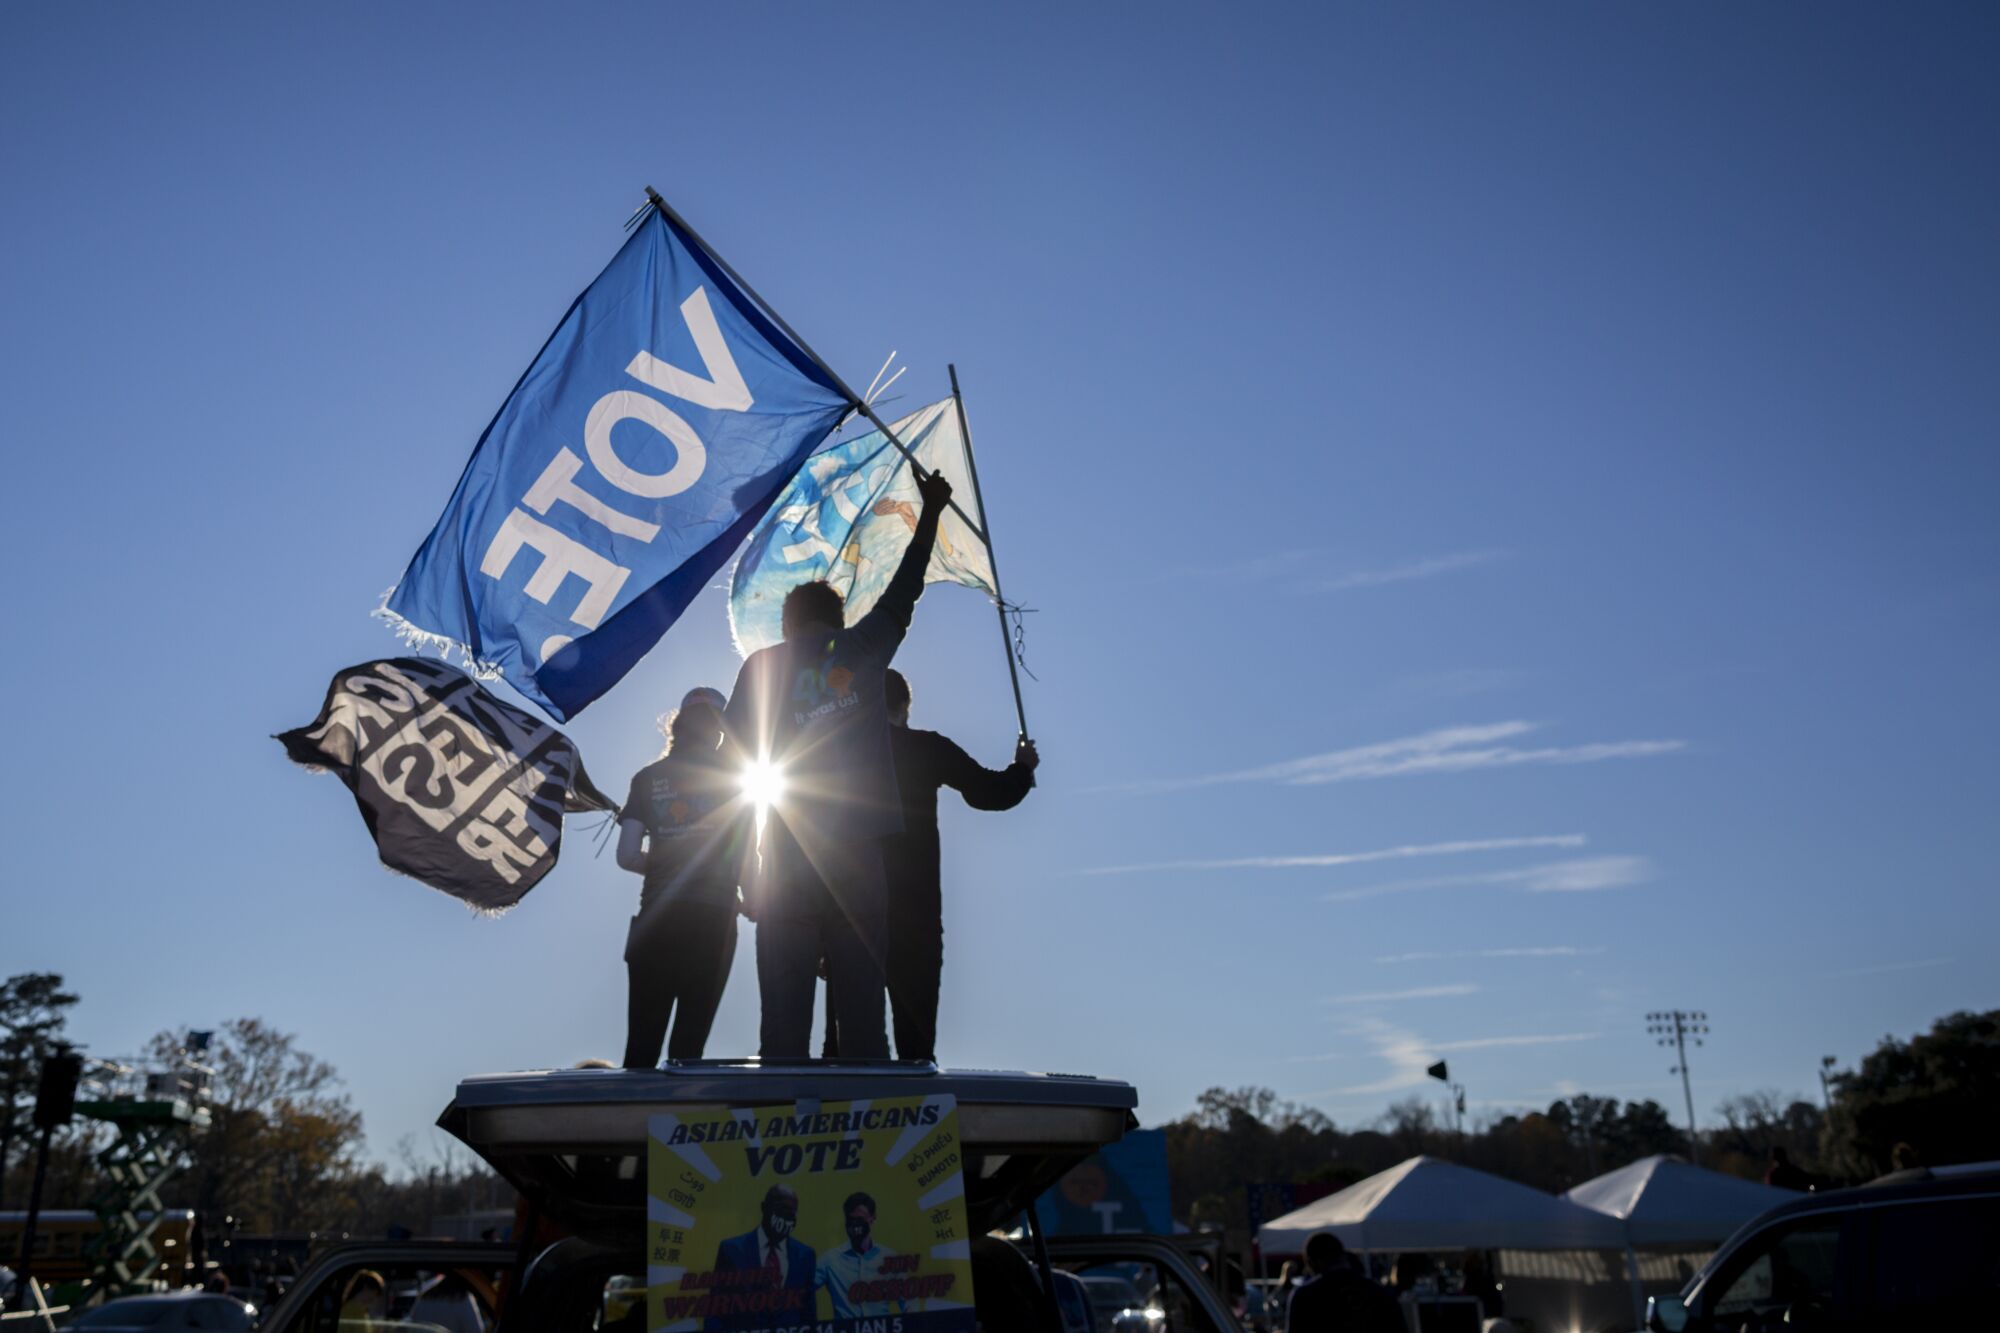 Supporters wave flags as they wait for Vice President-elect Kamala Harris at a drive-in rally